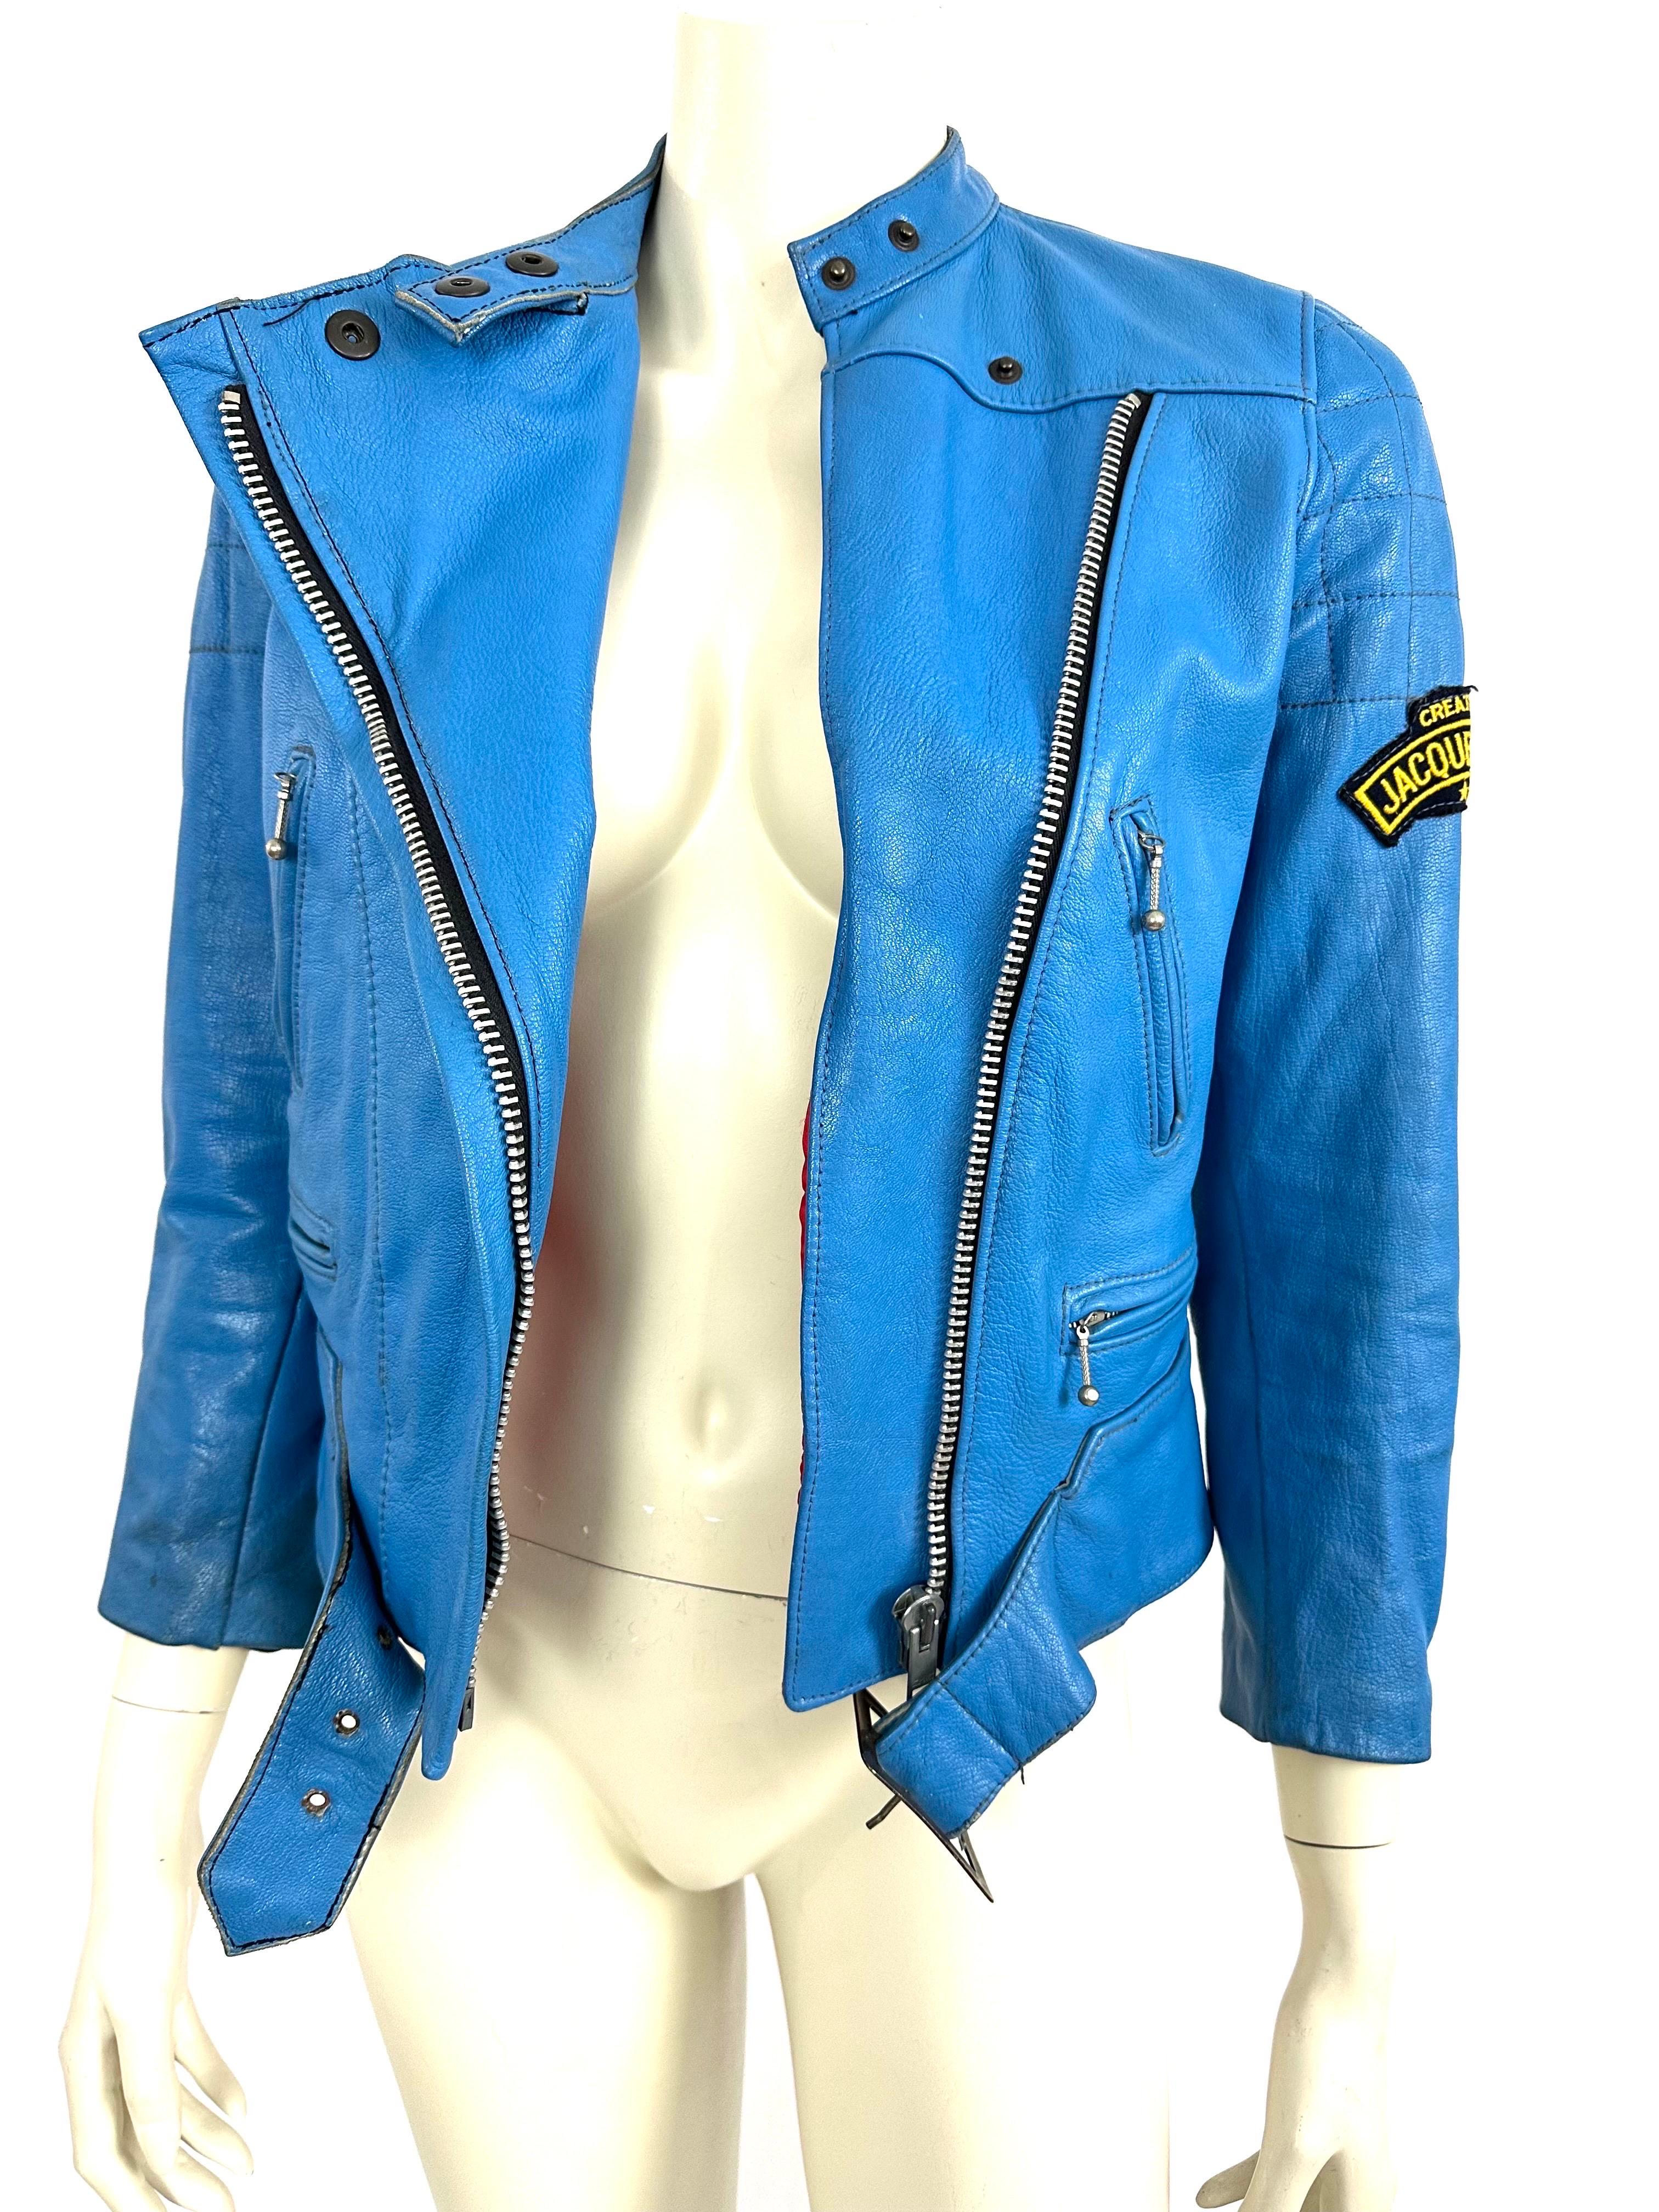 Rare Jacques Icek biker leather jacket from the 70s For Sale 2